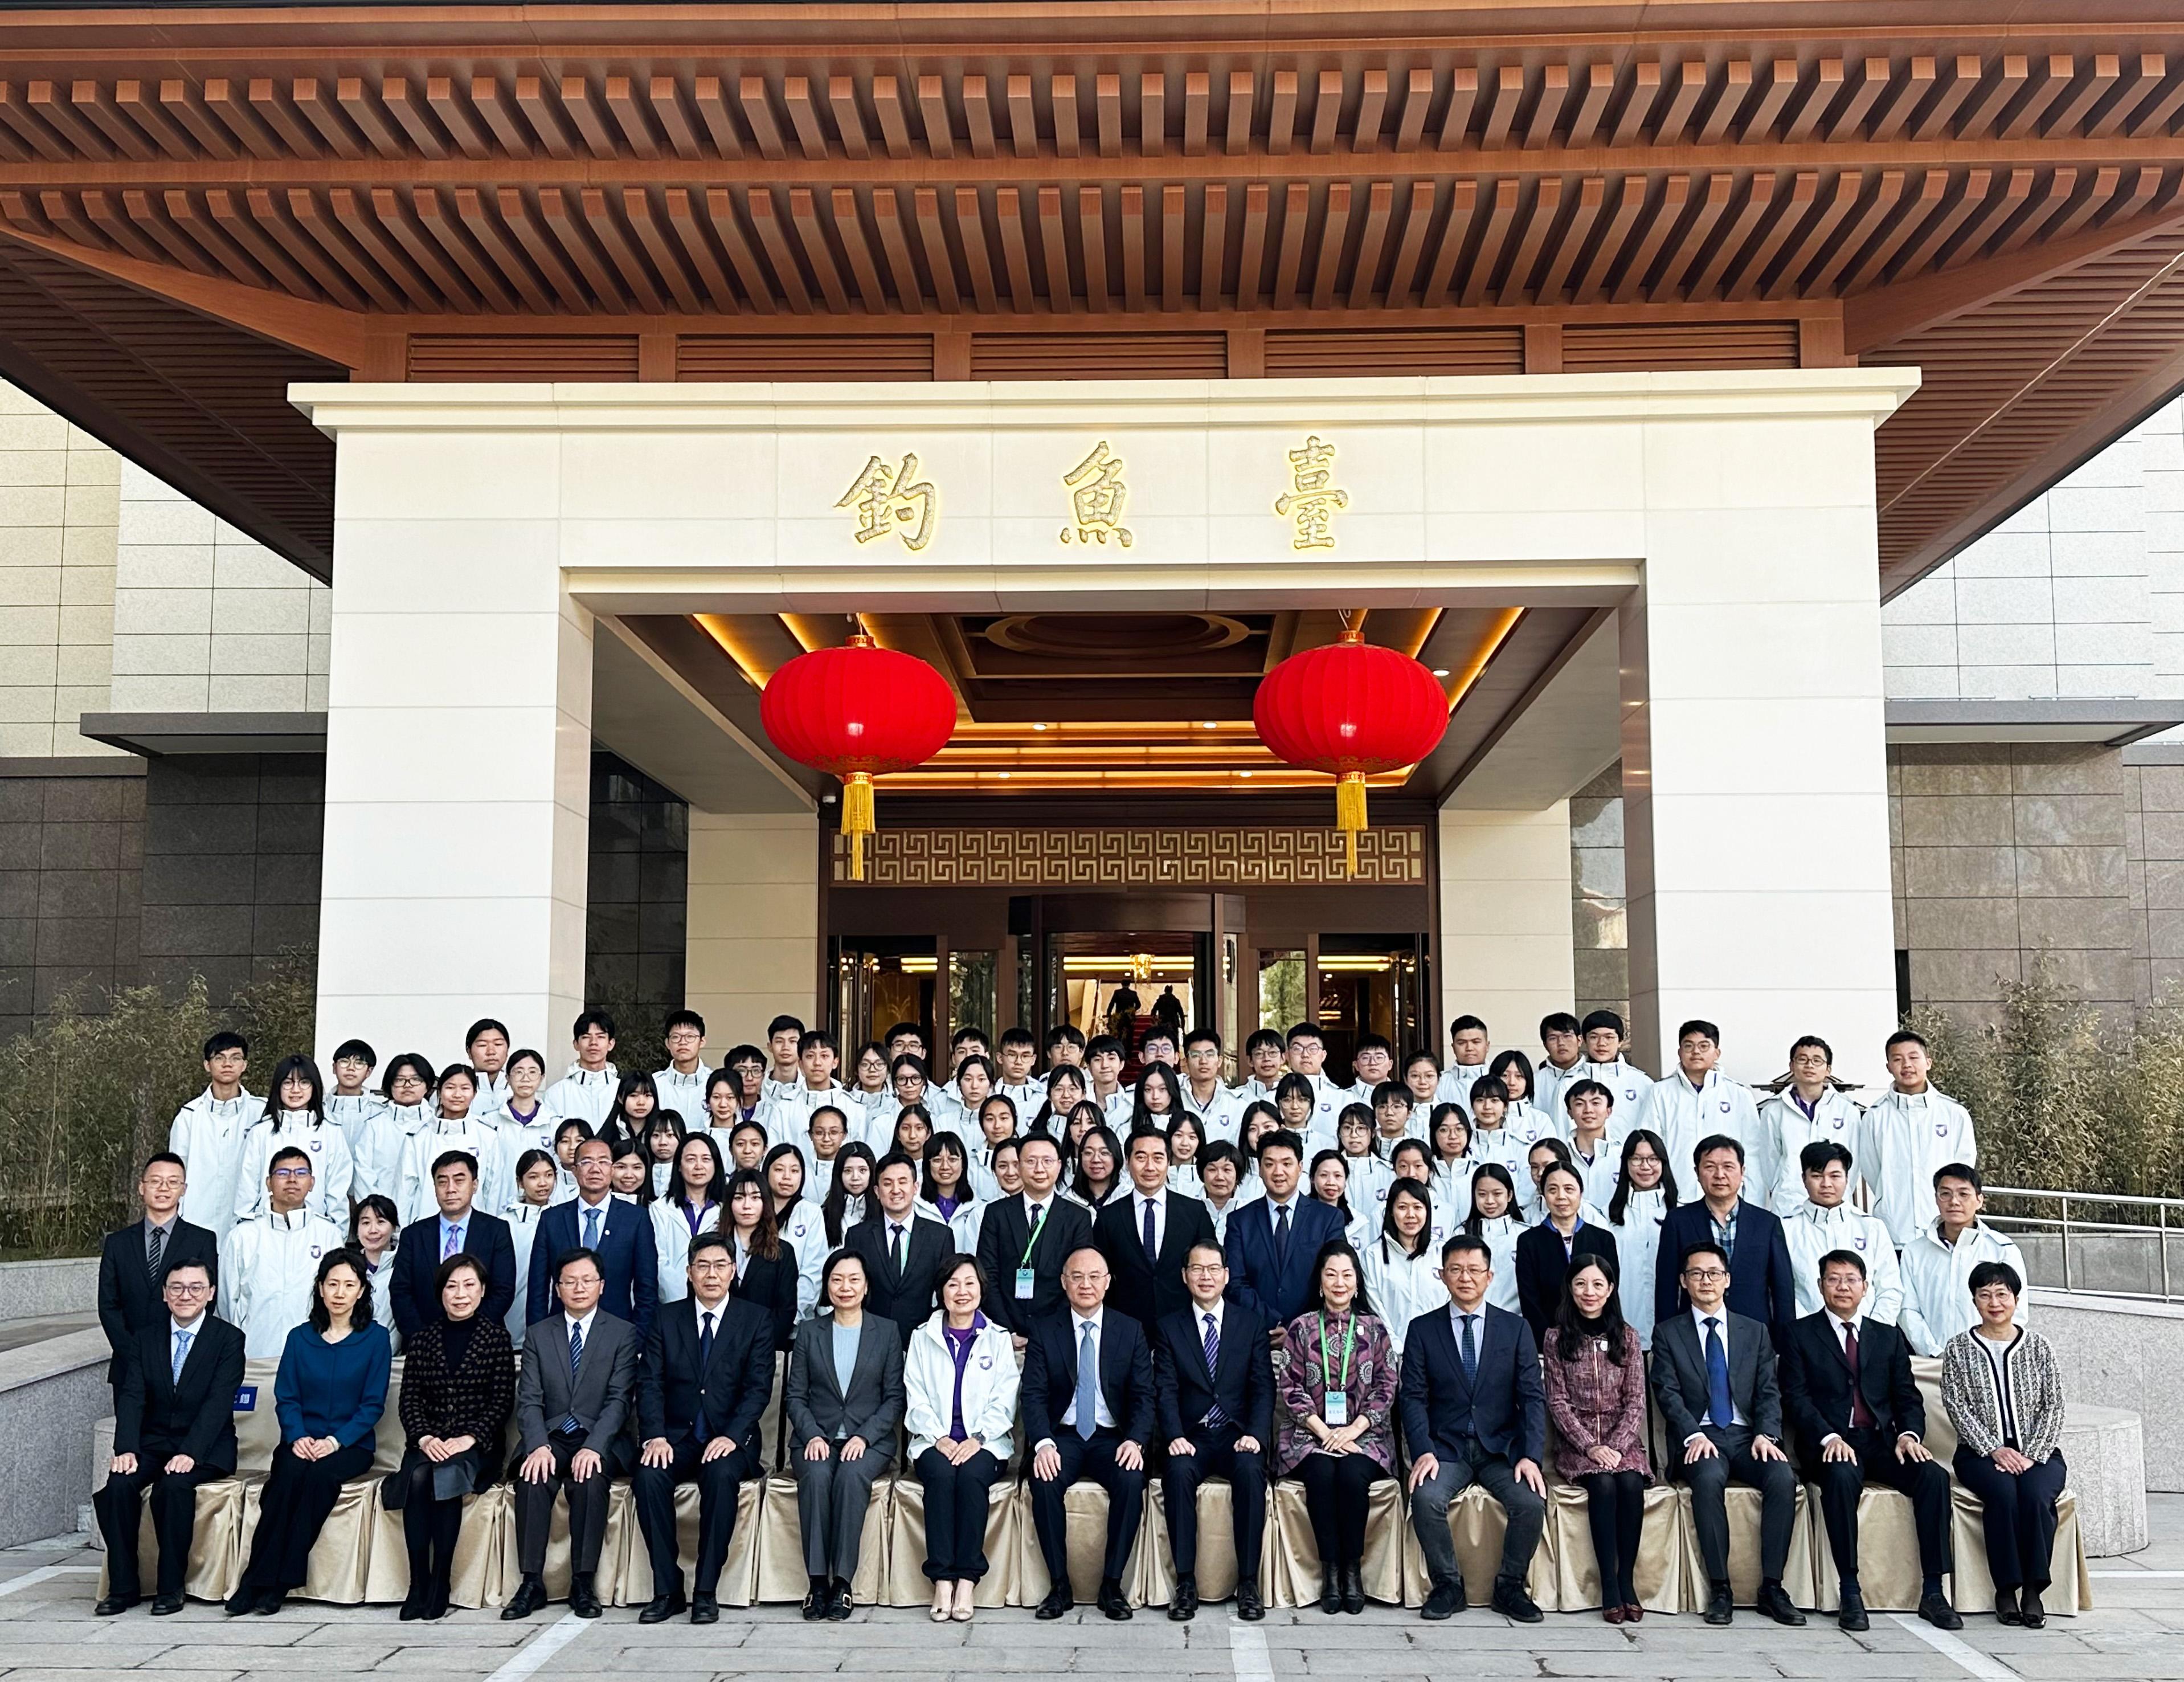 The Secretary for Education, Dr Choi Yuk-lin, attended the opening ceremony of the National Security Education Study Tour in Beijing today (March 29). Photo shows the Deputy Director of the Hong Kong and Macao Work Office of the Communist Party of China Central Committee, Mr Nong Rong (front row, centre); Dr Choi (front row, seventh left); the Secretary General of the Committee for Safeguarding National Security of the Hong Kong Special Administrative Region, Mr Sonny Au (front row, seventh right), and members of the study tour.